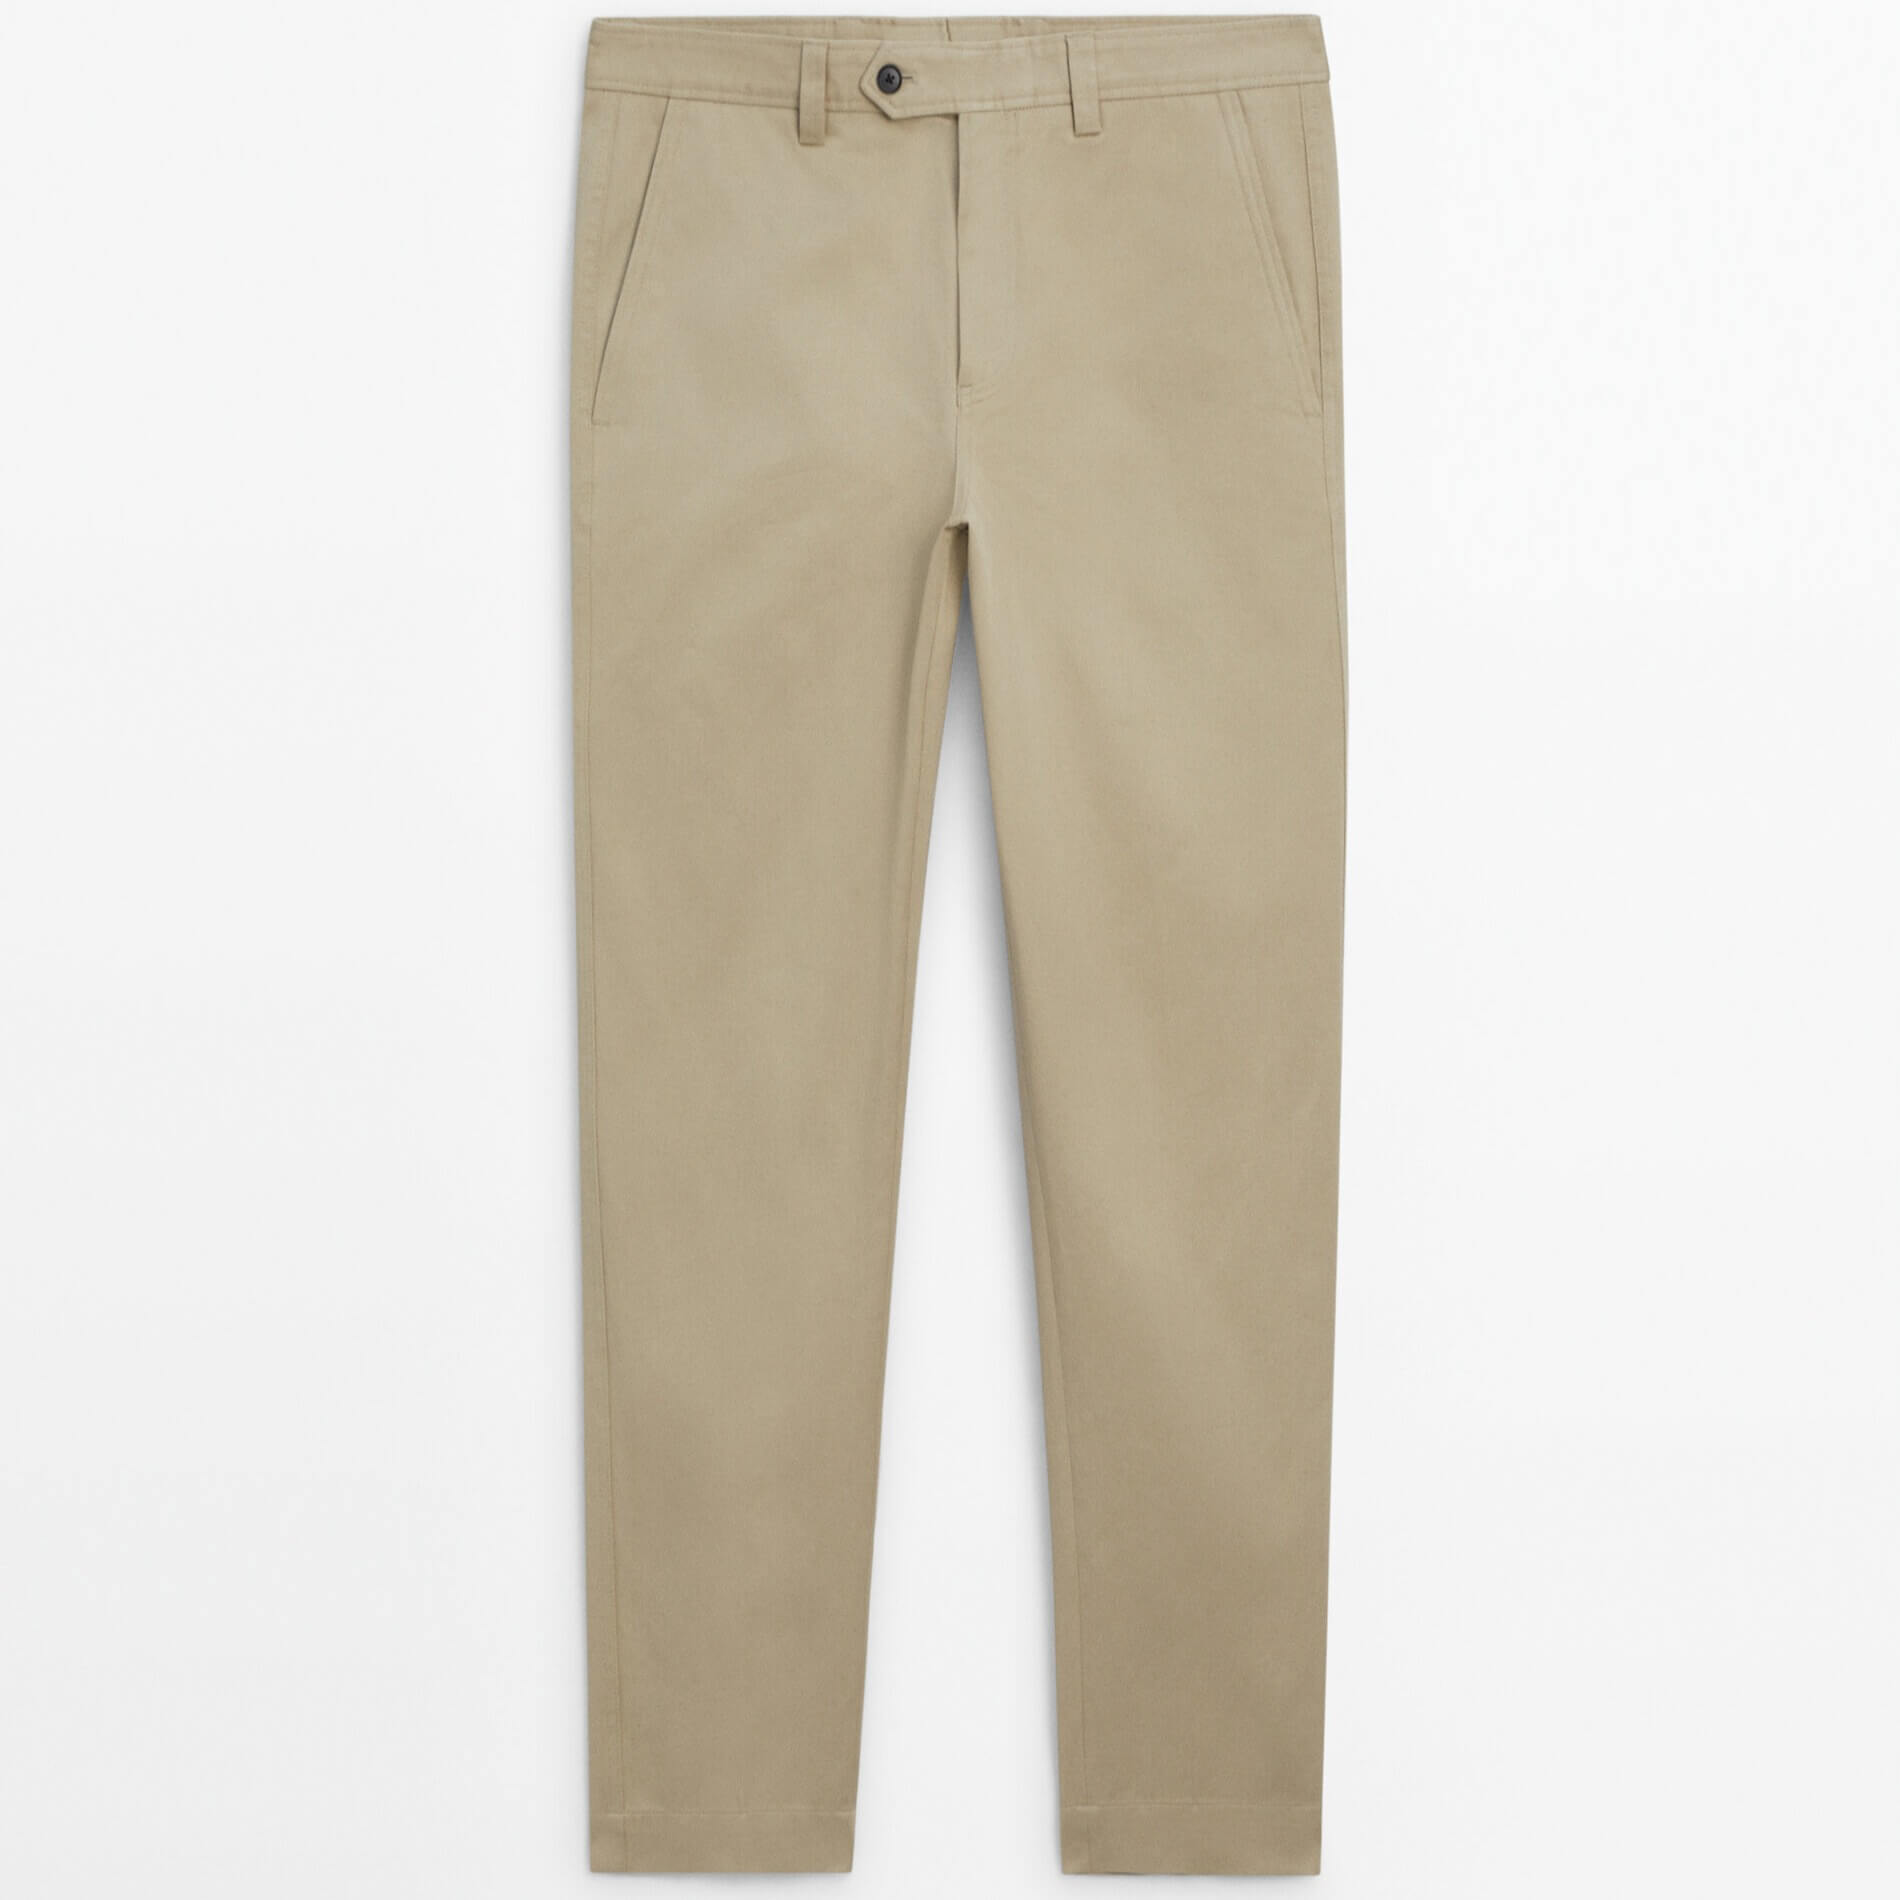 Брюки Massimo Dutti Relaxed Fit Belted Chino, бежевый фото